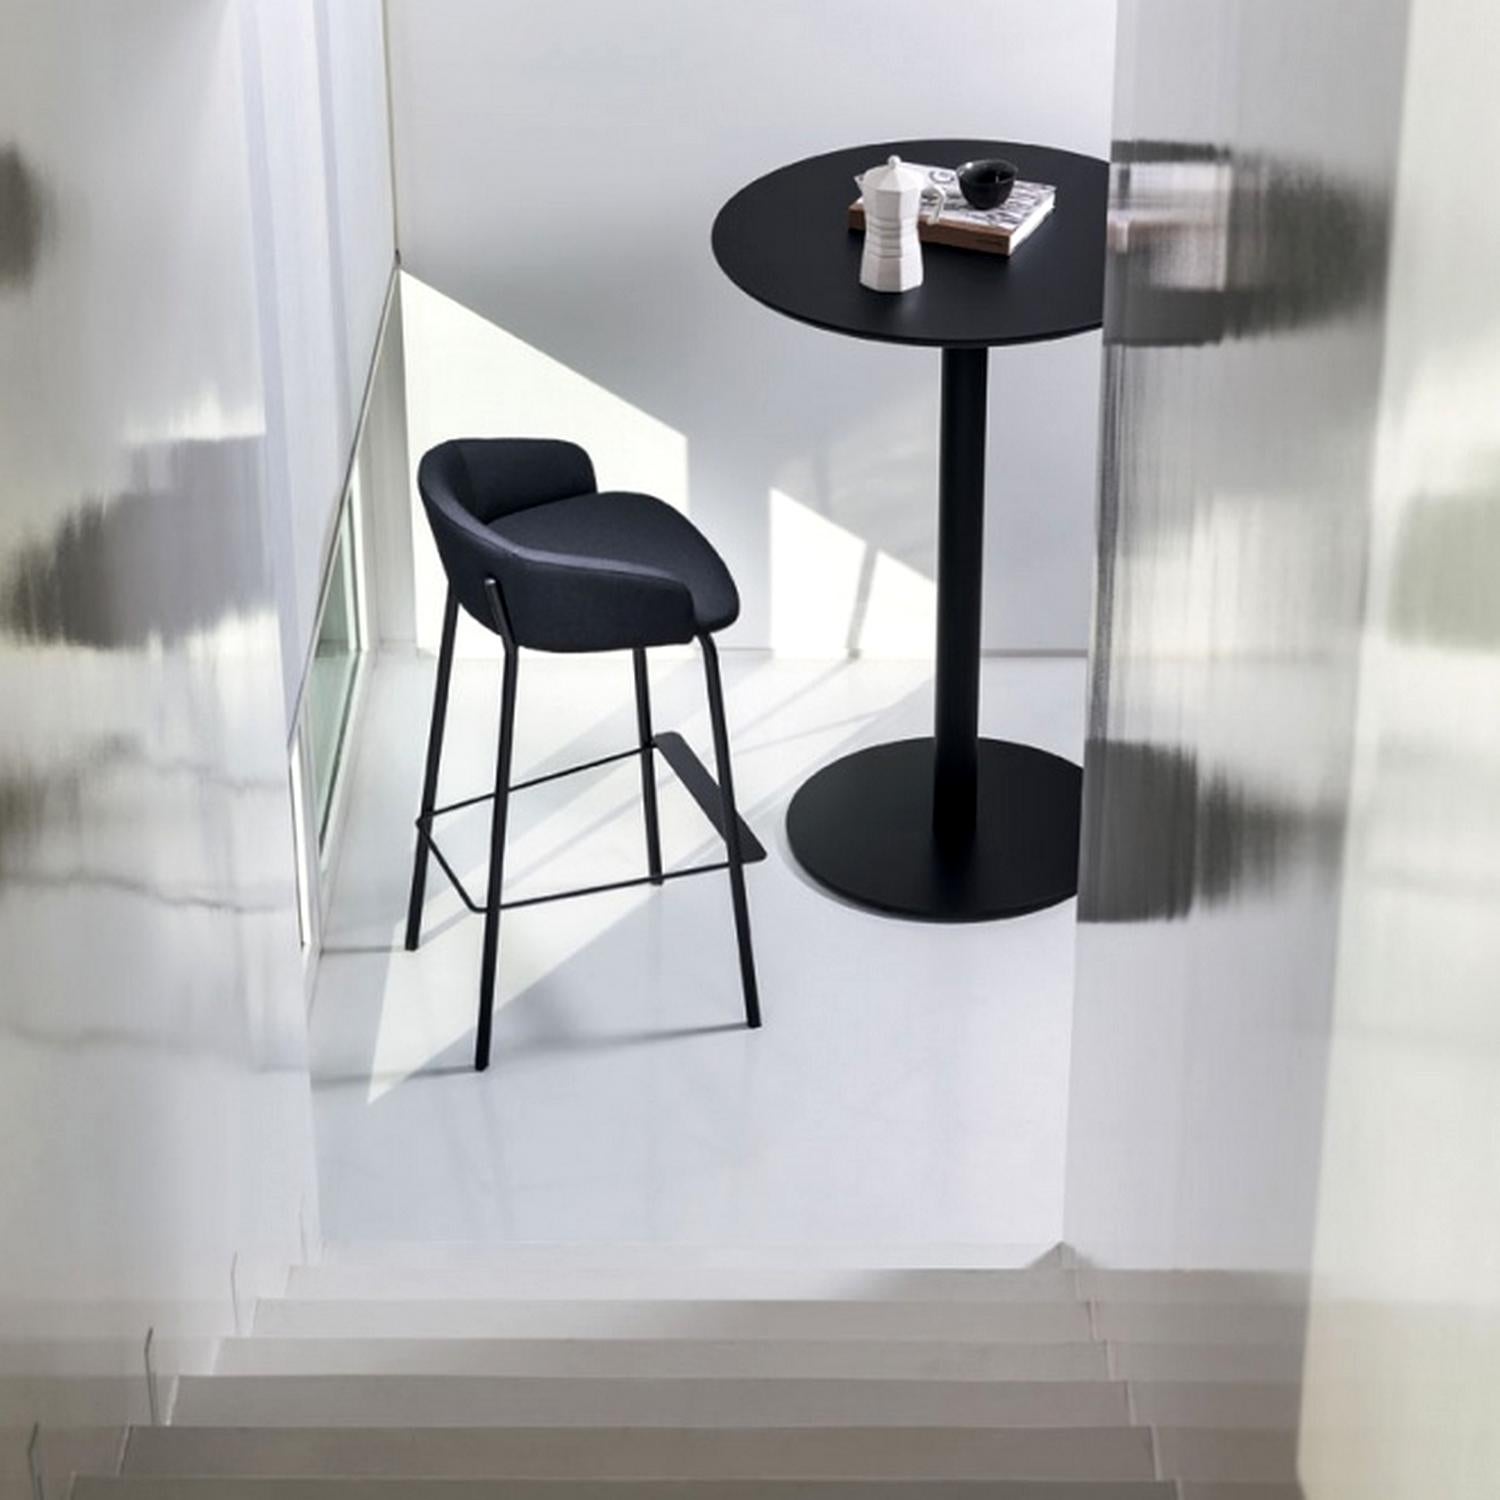 Contemporary In Stock in Los Angeles, Black Leather Stool by Marco Zito, Made in Italy